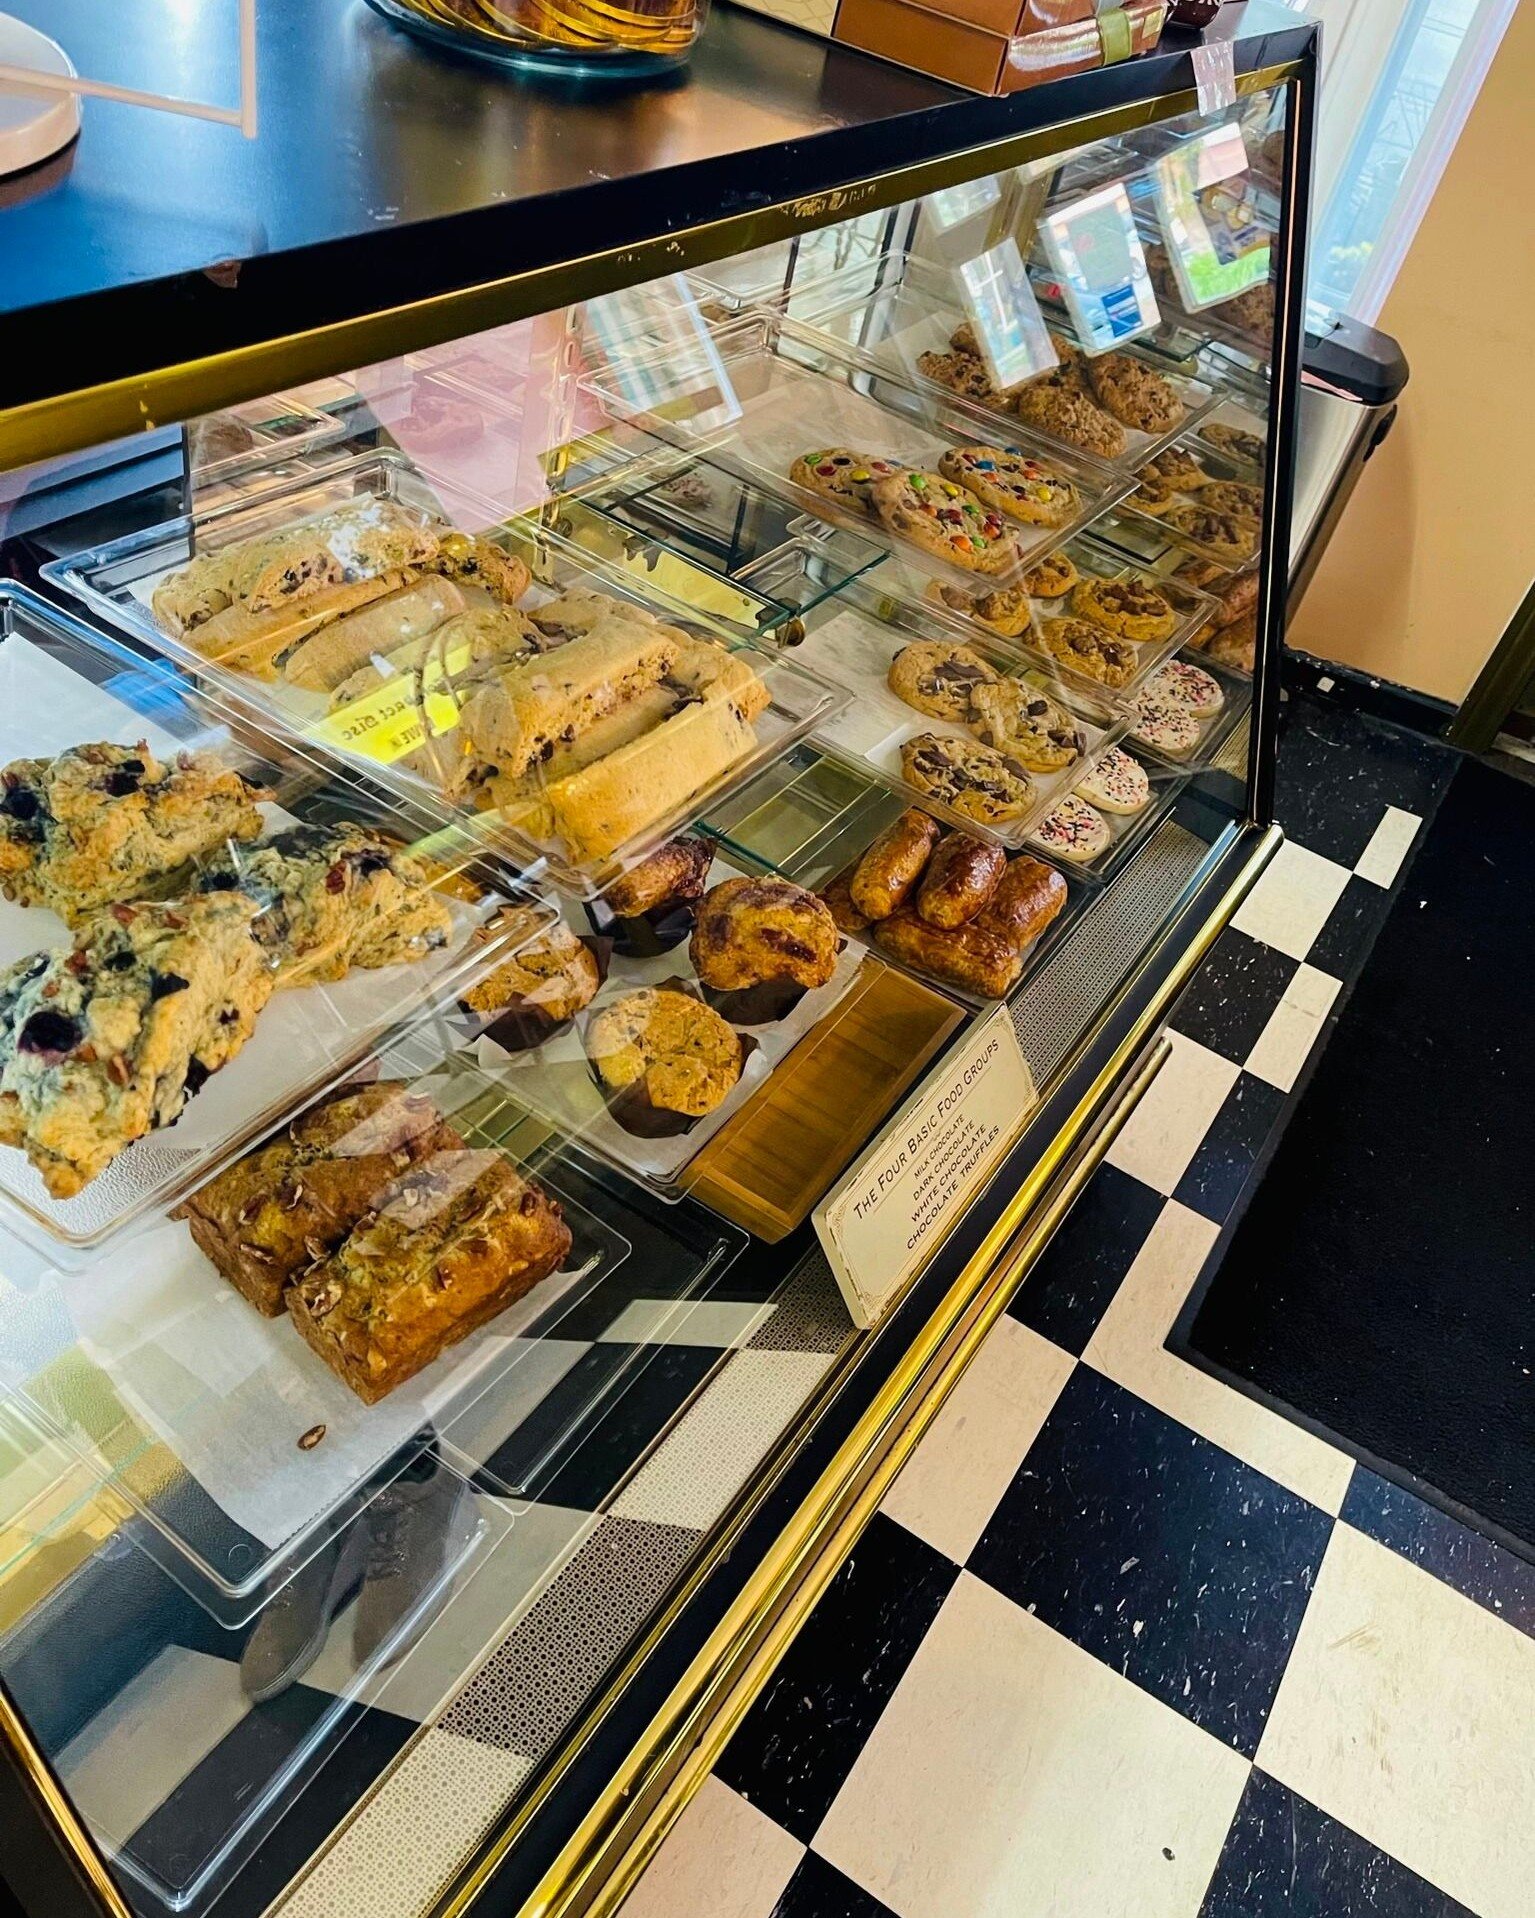 Have you checked out our new baked goods display yet? You're gonna want to get your hands on one of these delicious cookies ASAP!

 #chocolatebarcafe #treatyourself #cookies #bakedgoods #displaywindow